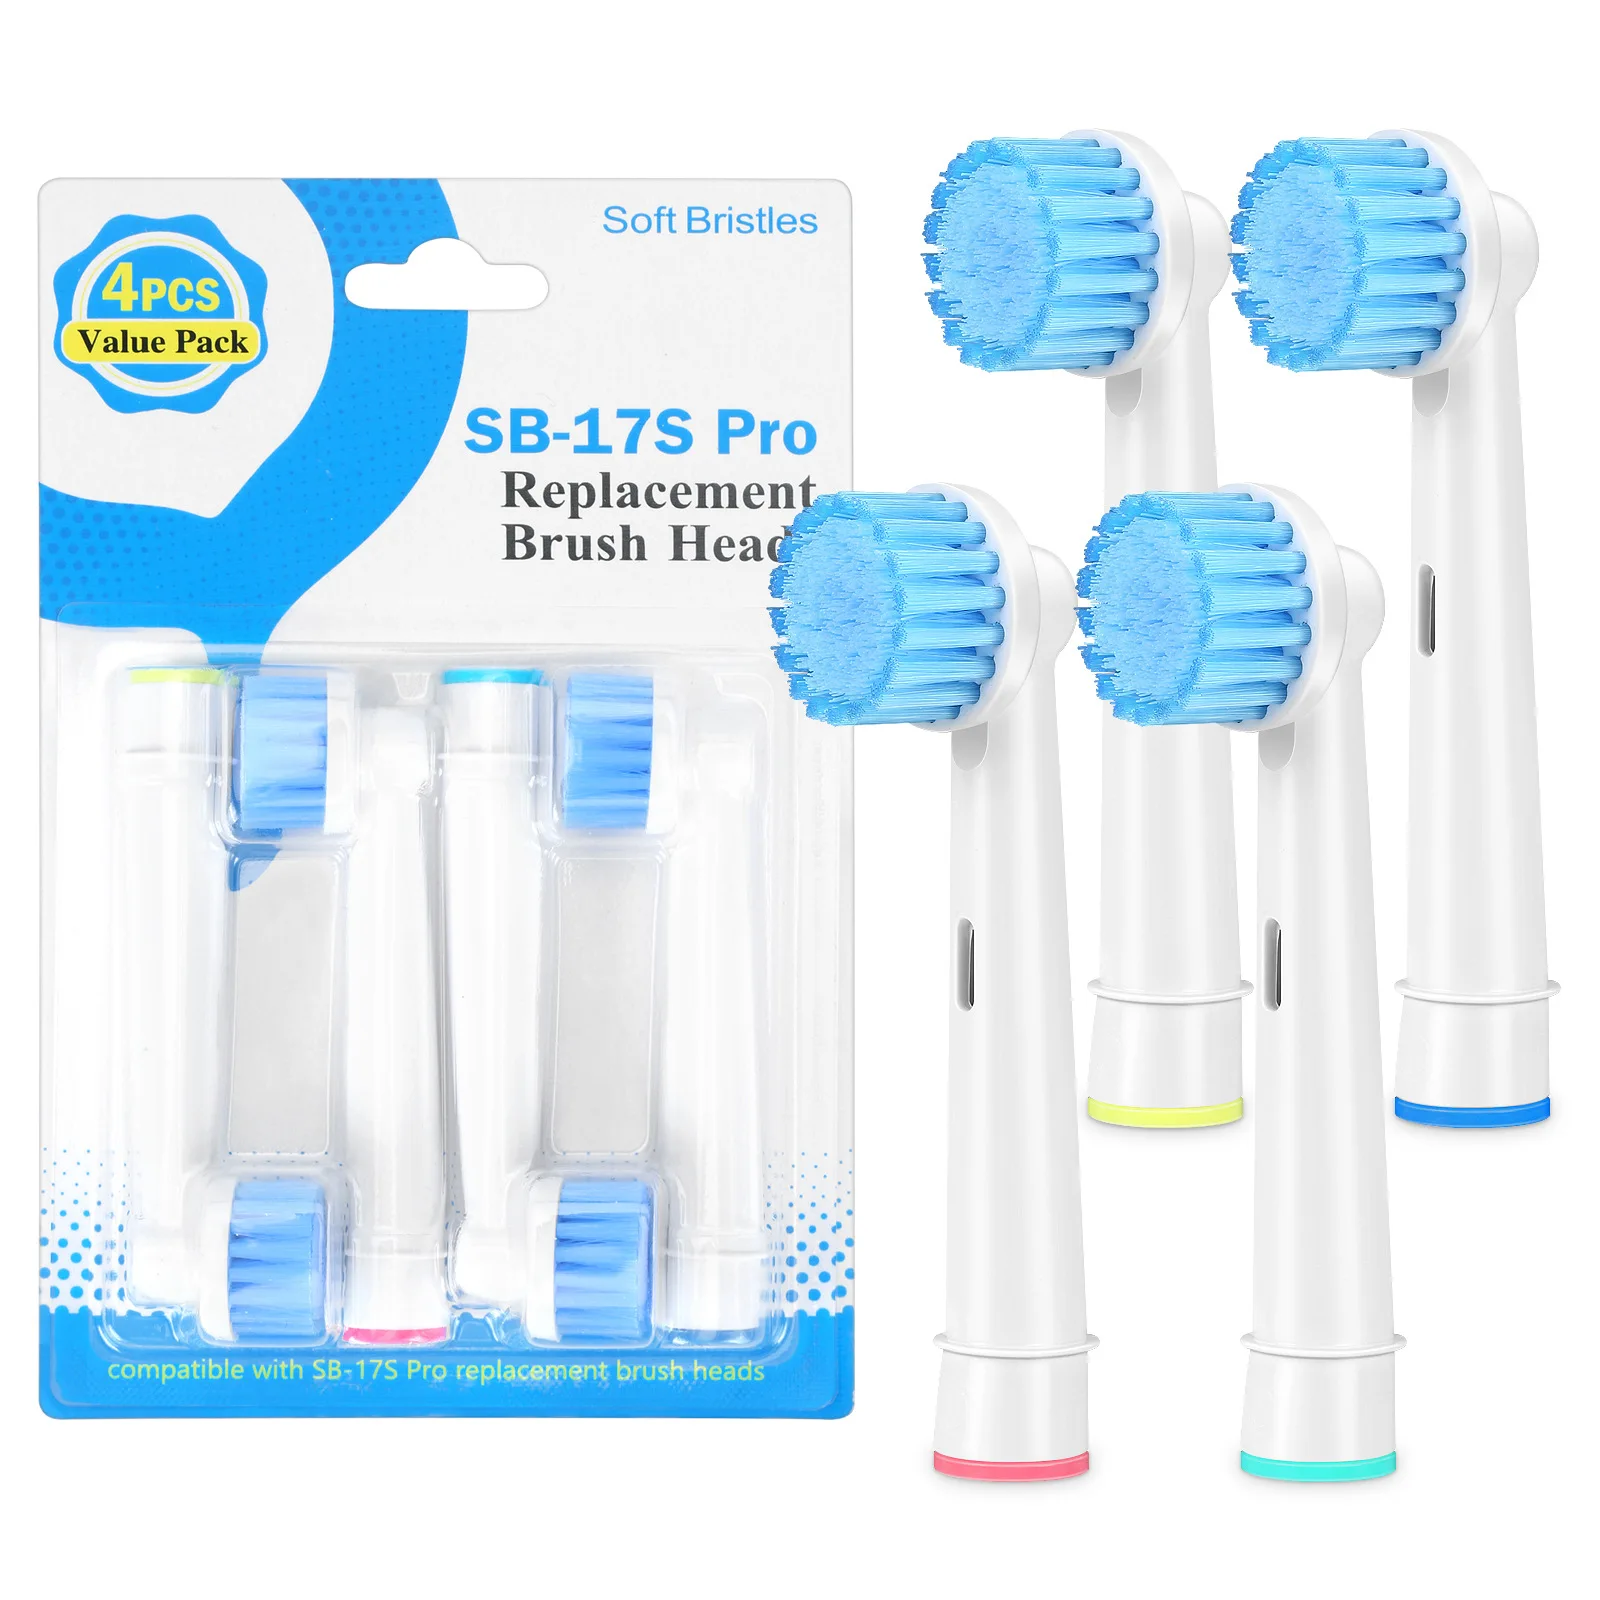 4 Pcs/Pack Replacement Brush Heads For Oral B Electric Toothbrush Head Soft Dupont Bristle Teeth Cleaning & Whitening Brush Head waterproof bib high absorbent saliva towel face cleaning cloth brush teeth bib for mealtime messes and bath time fun